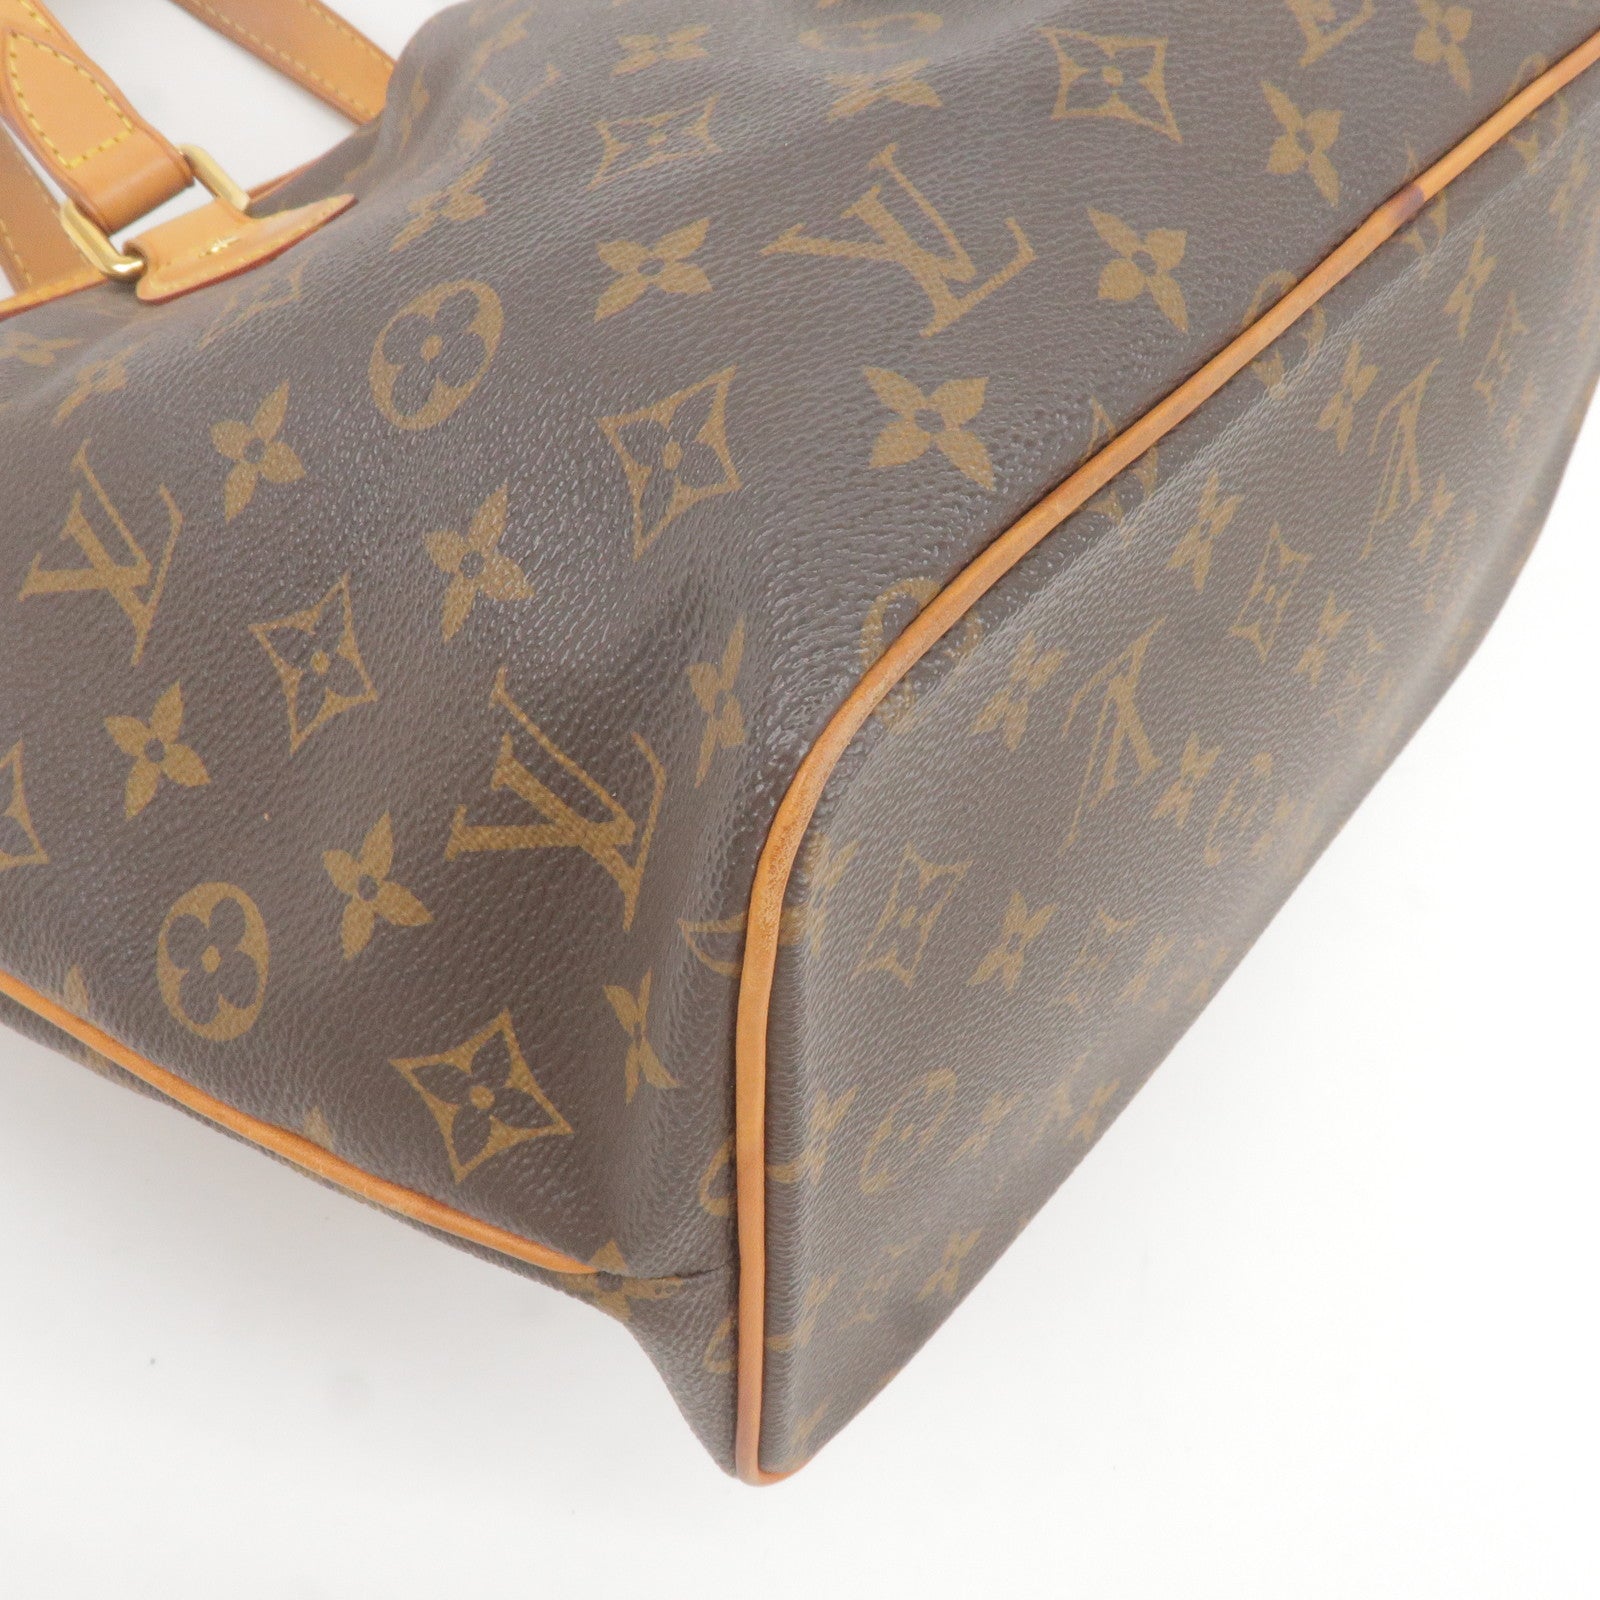 Louis Vuitton 2002 pre-owned Luco Tote Bag - Farfetch